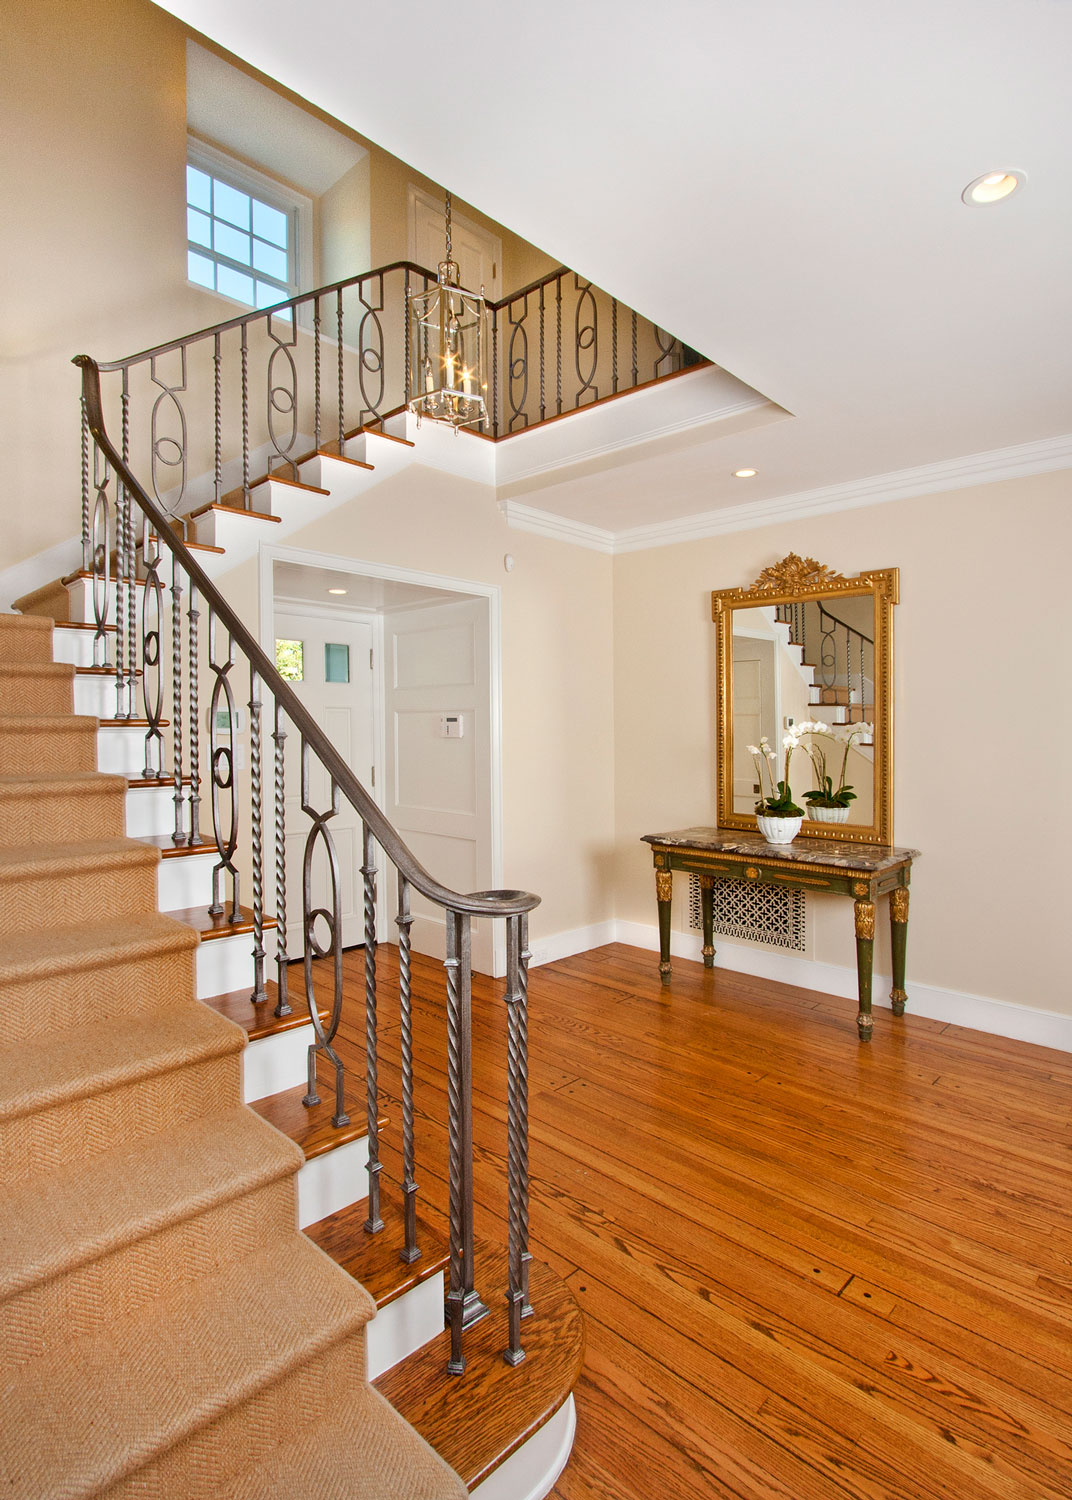 09-front-entry-staircase-iron-railing-gary-drake-general-contractor.jpg